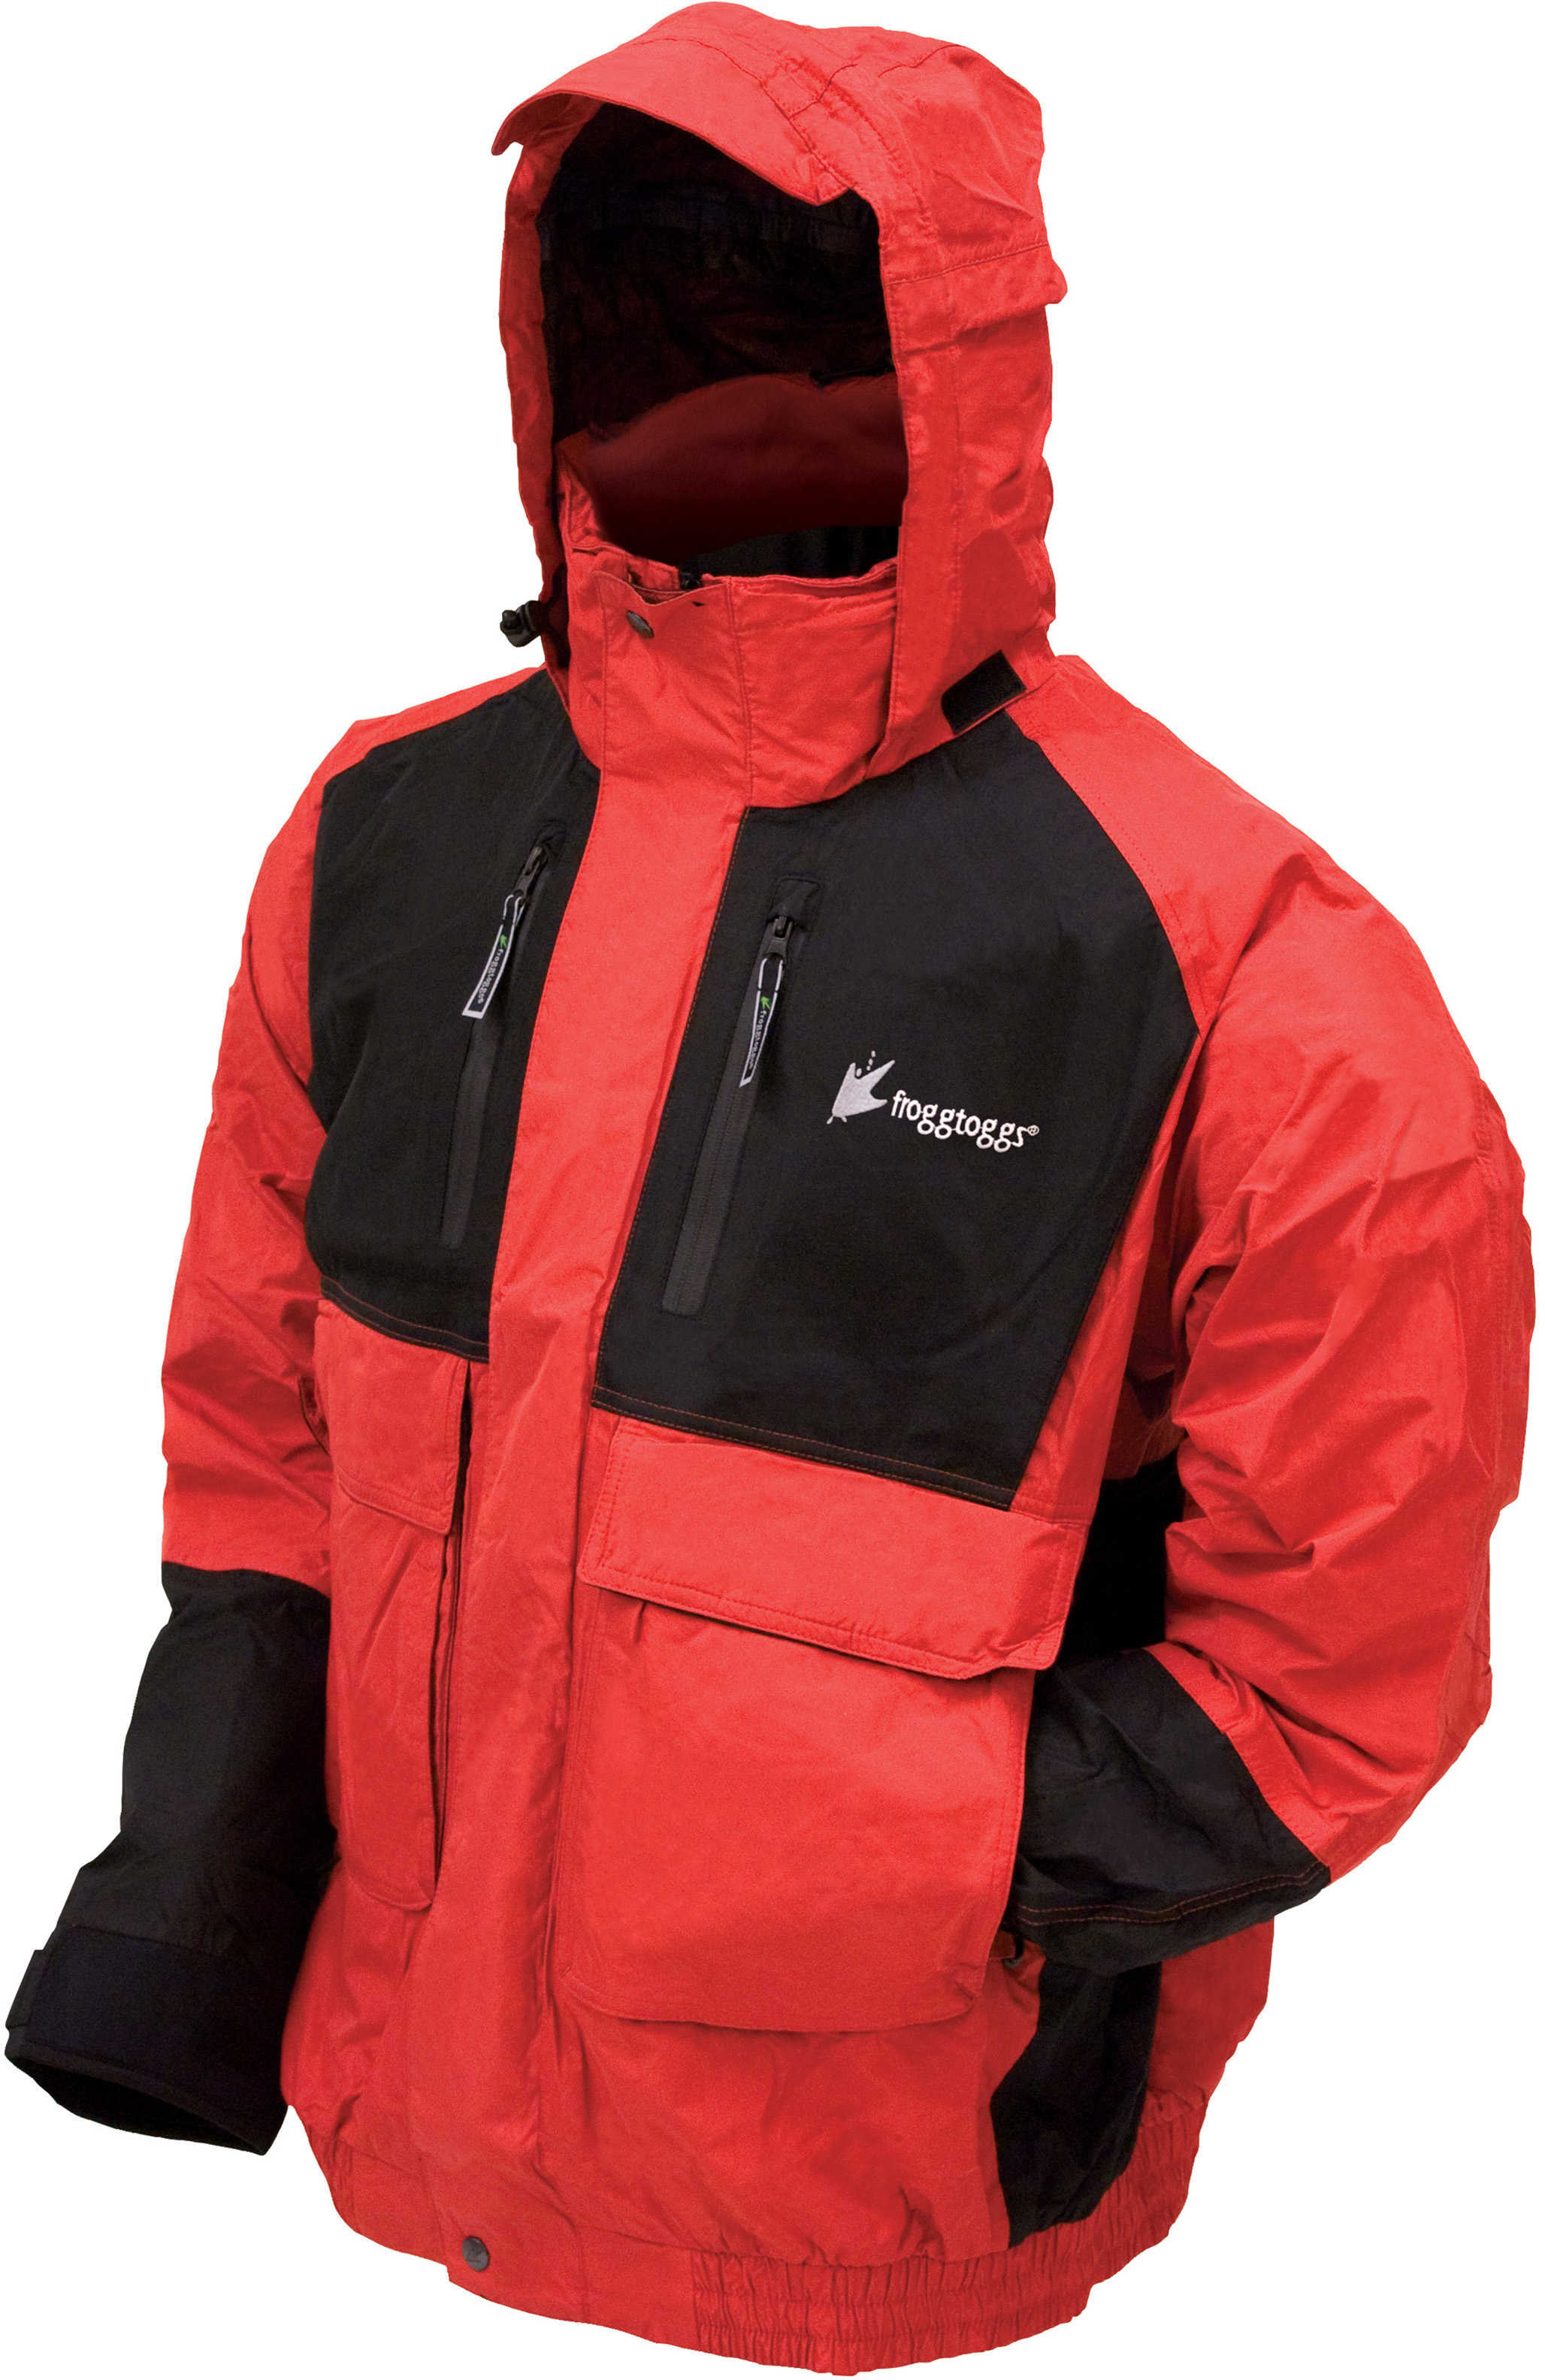 Frogg Toggs Firebelly Toadz Jacket Black/Red Large NT6201-110LG